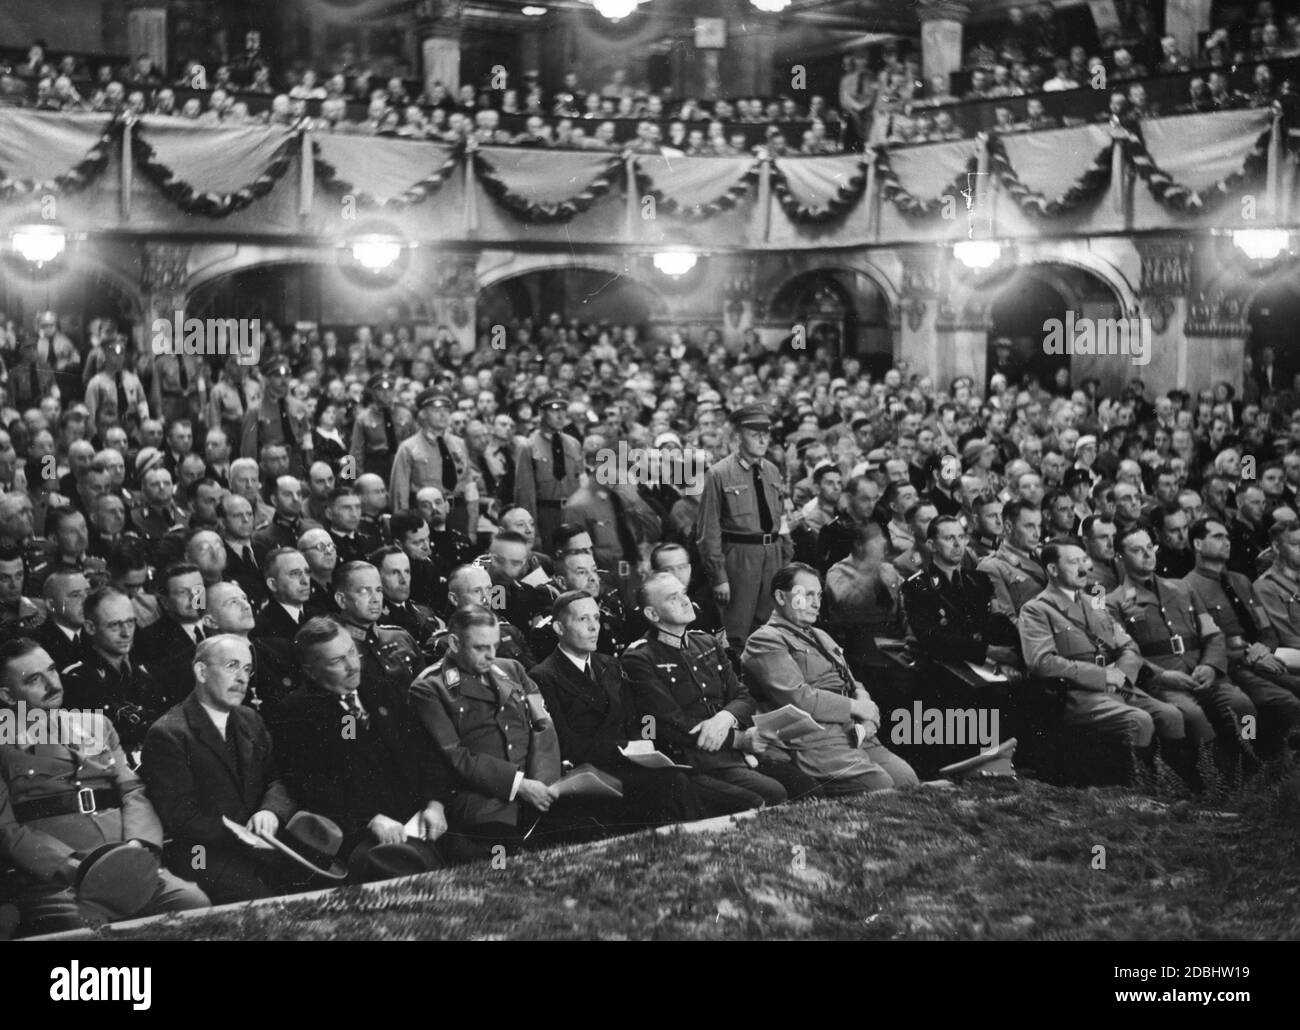 View of the first row of spectators at the cultural conference of the NSDAP in Nuremberg's Apollo Theater, where Alfred Rosenberg and Adolf Hitler give speeches and the Reich Symphony Orchestra presents a musical performance. 1st row from left: Bernhard Rust, Baron Paul Eltz von Ruebenach, Franz Guertner, Franz Seldte, Johann Ludwig Graf Schwerin von Krosigk, Colonel General Werner von Blomberg, Hermann Goering, Adolf Hitler, Alfred Rosenberg, Rudolf Hess, and the Chief of Staff of the SA Viktor Lutze. In the 2nd row behind Blomberg is Erich Raeder, to the left Werner von Fritsch and Walter Stock Photo